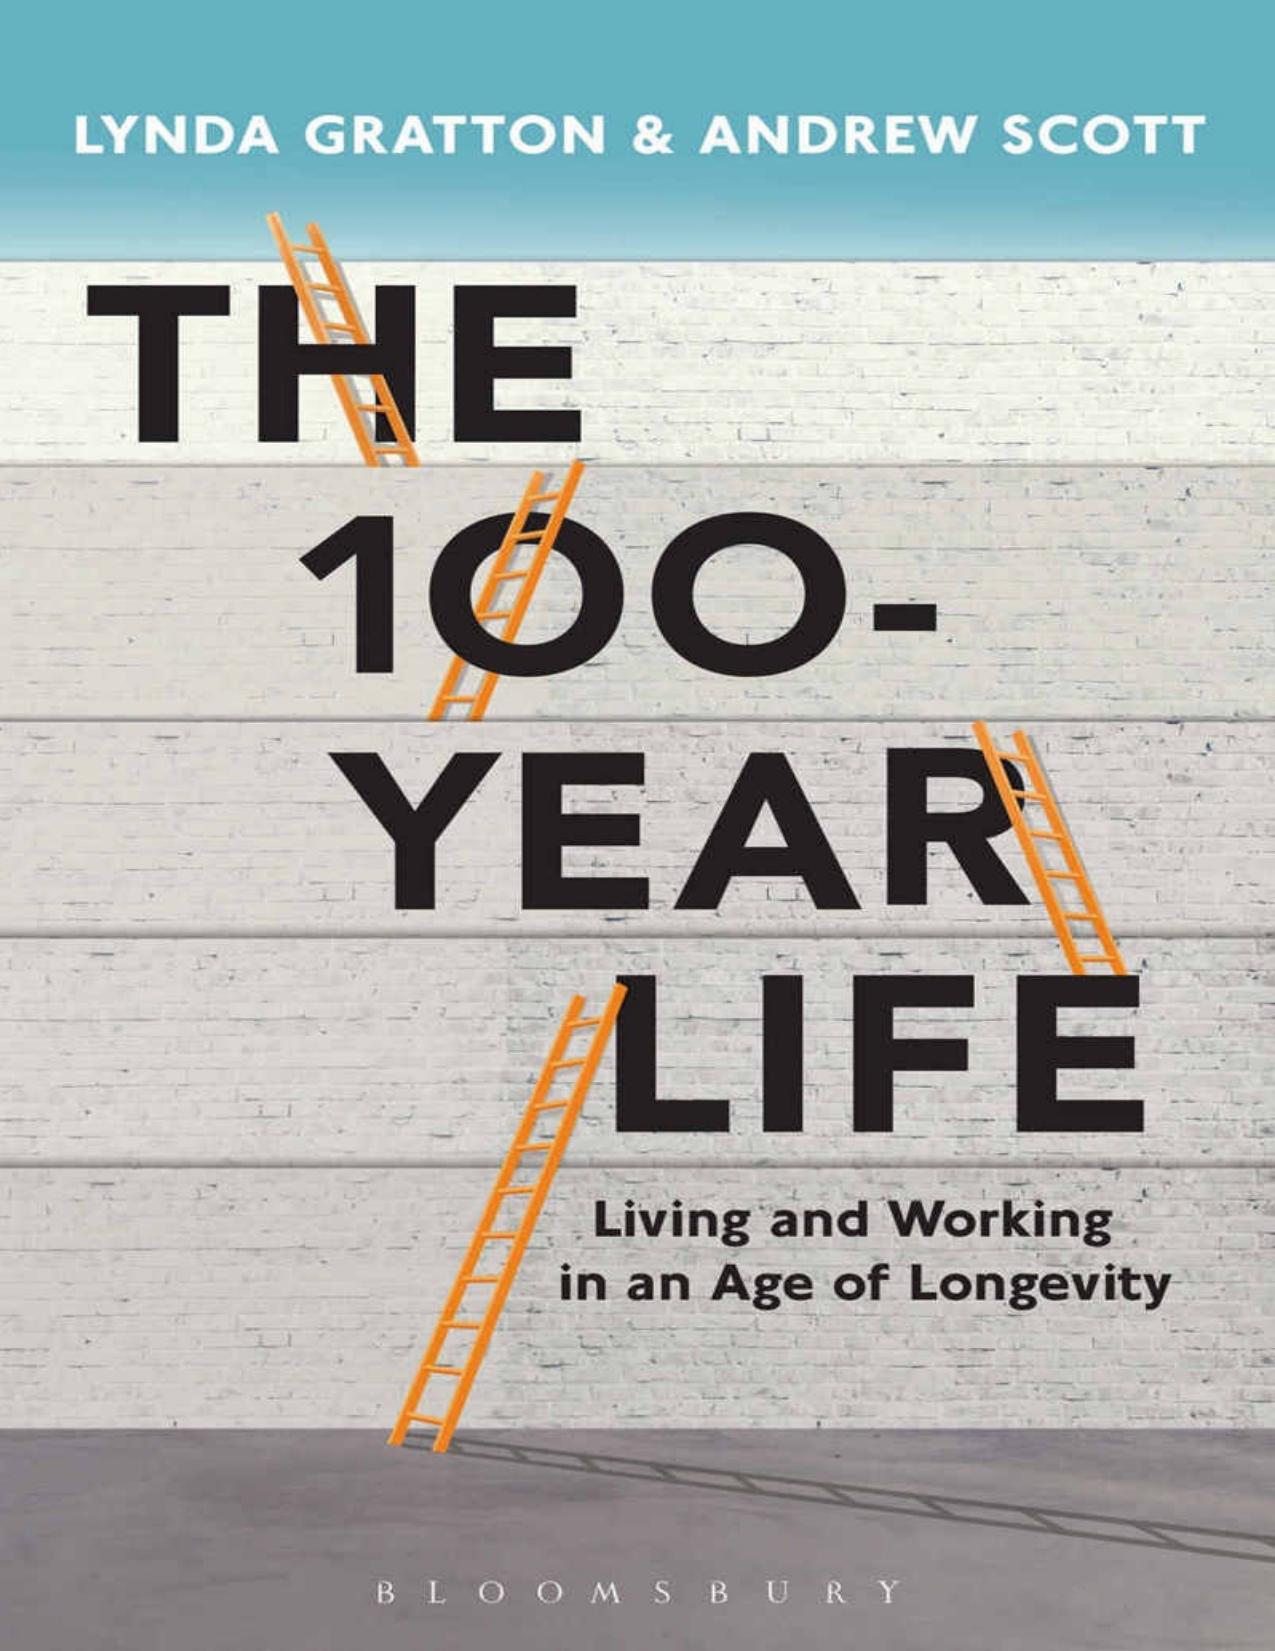 The 100-Year Life: Living and working in an age of longevity - PDFDrive.com